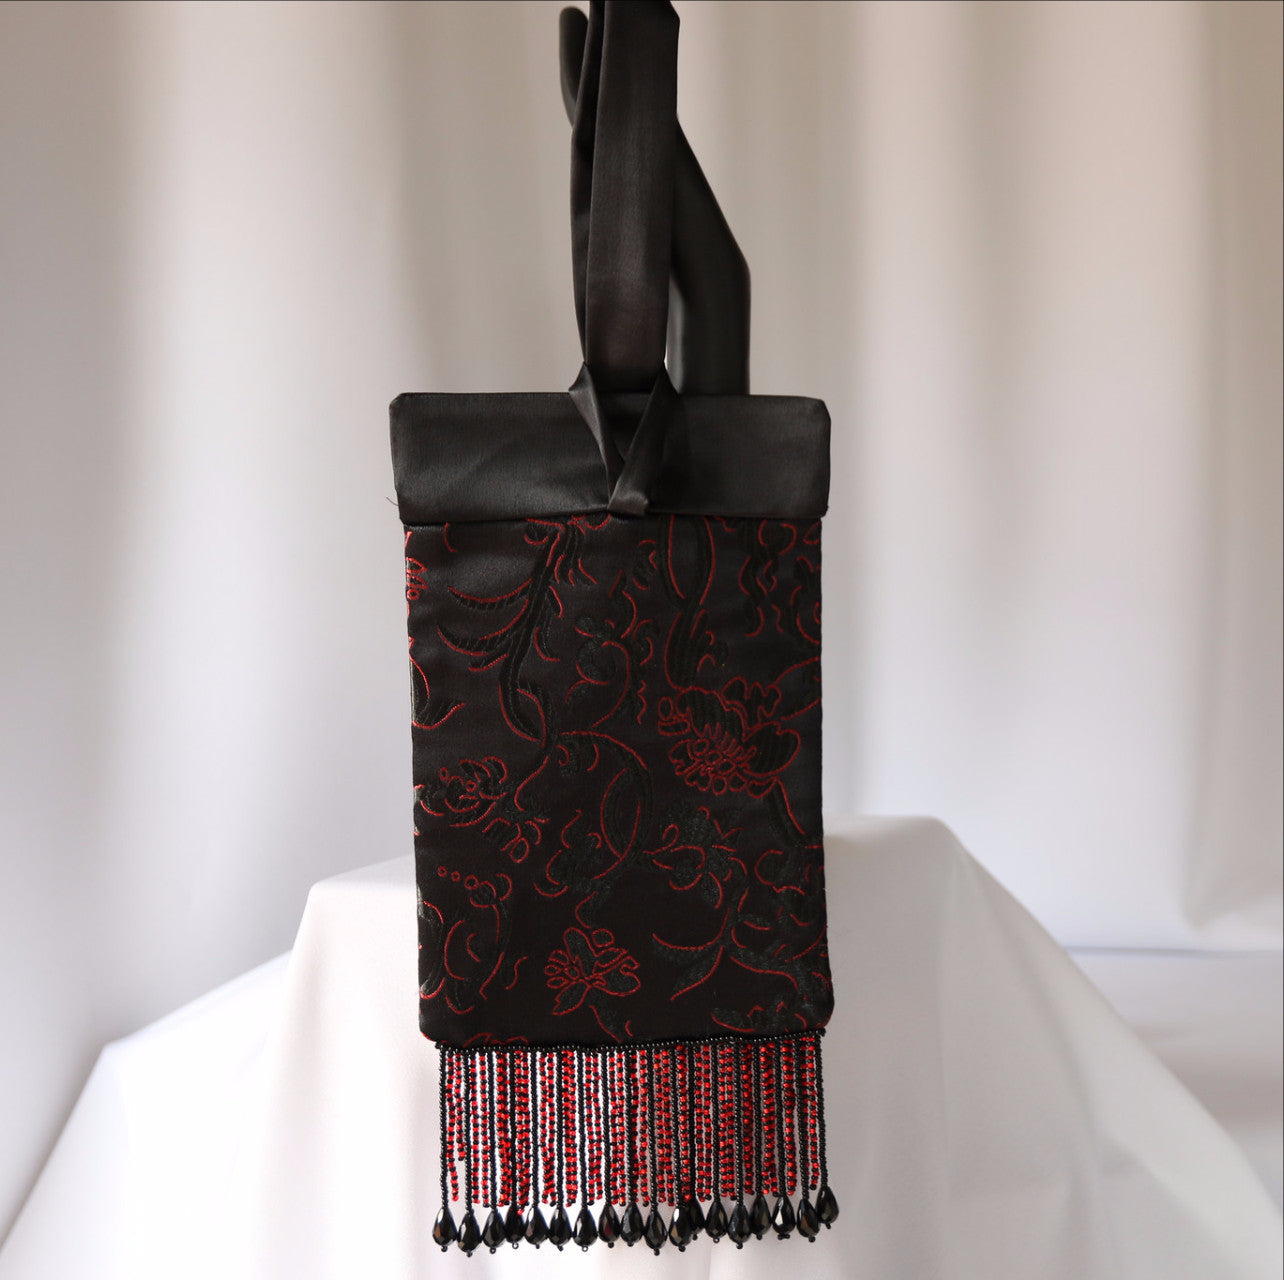 Black and red evening bag with black satin lining and beaded fringe.